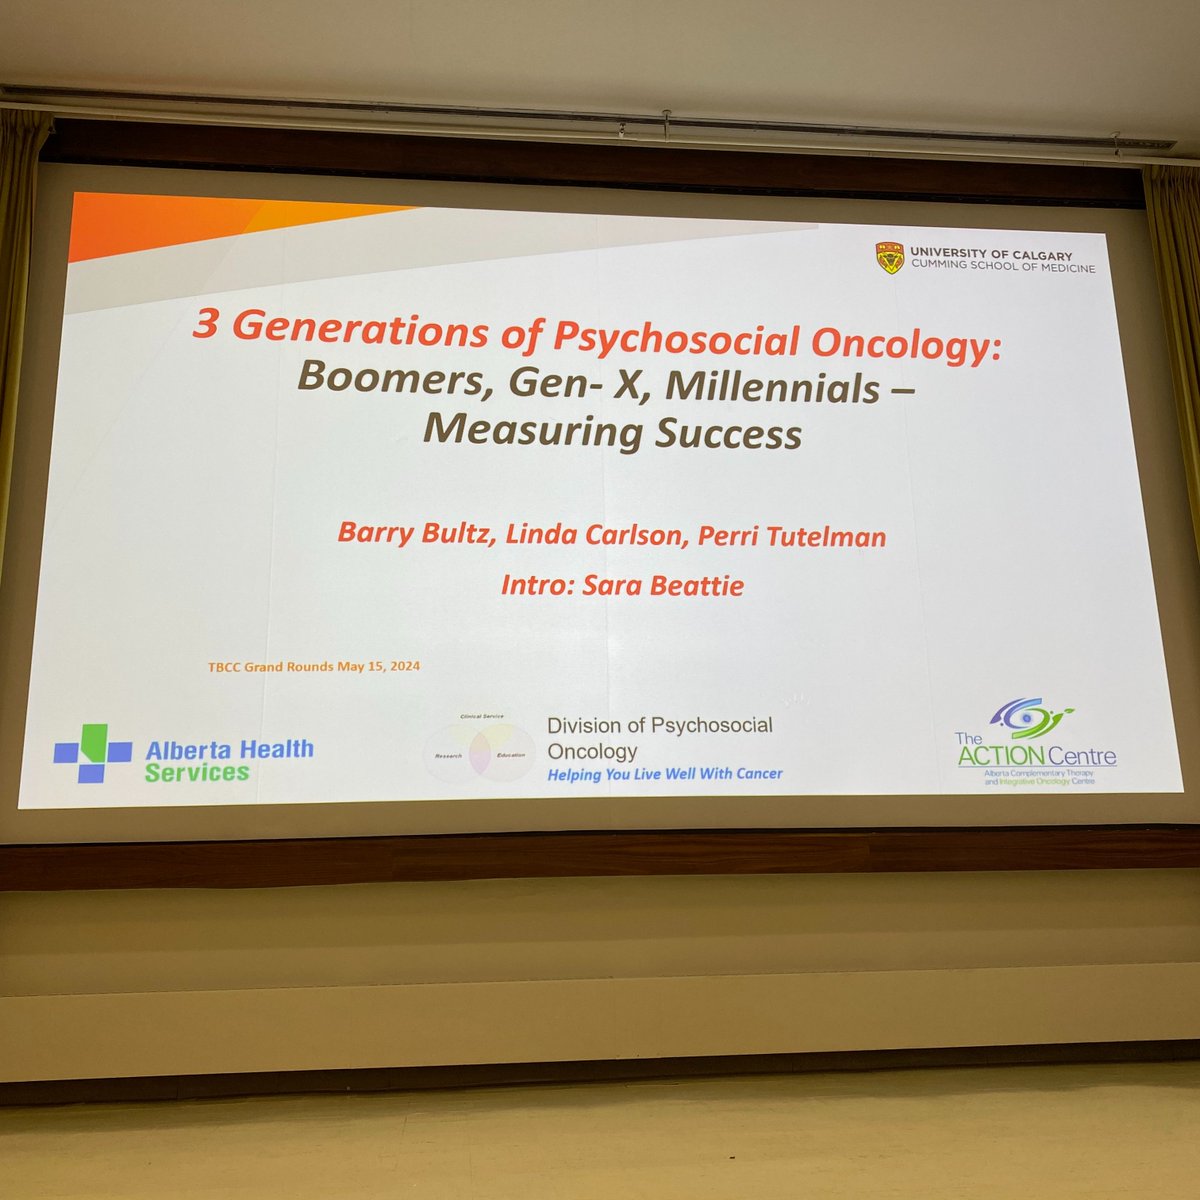 Yesterday, 3 generations of scientists from the Division presented at the @UCalgaryMed Department of Oncology Grand Rounds. Learn more about the Division here: charbonneau.ucalgary.ca/explore-instit… @bdbultz @Linda_E_Carlson @DrPerriTutelman @Charb_Cancer @weowncancer @albertacancer